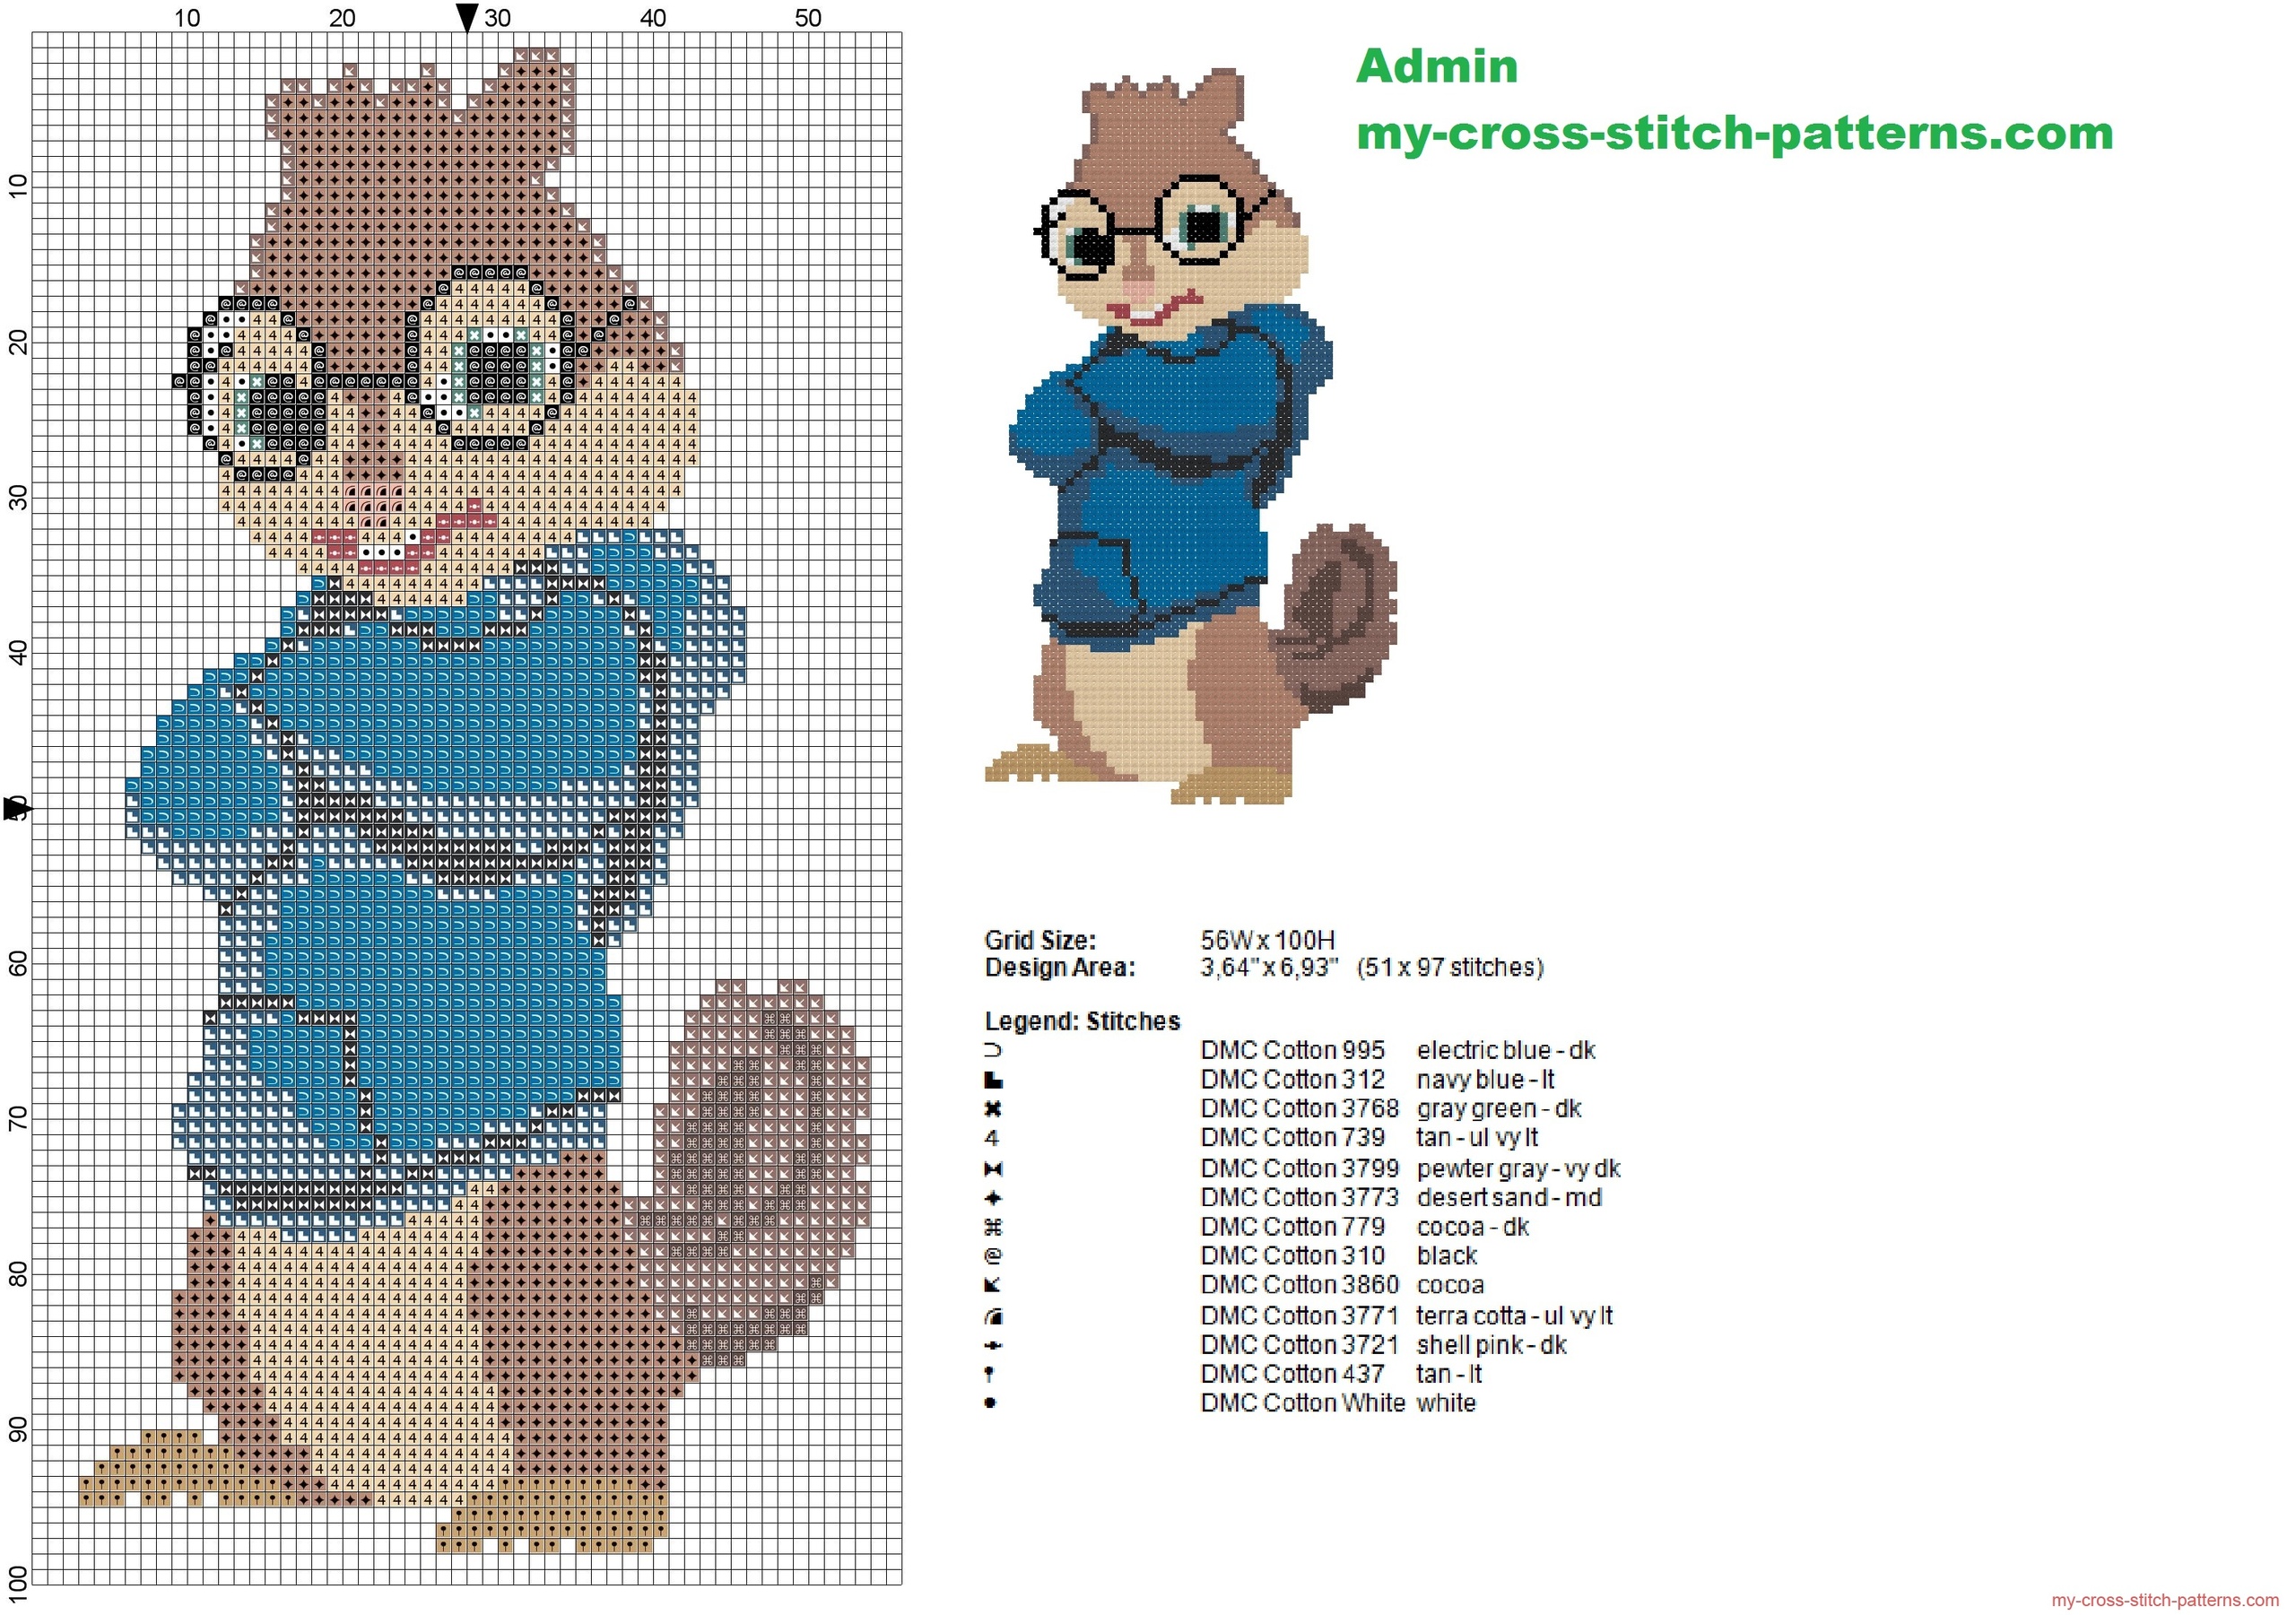 simon_from_alvin_and_the_chipmunks_cross_stitch_pattern